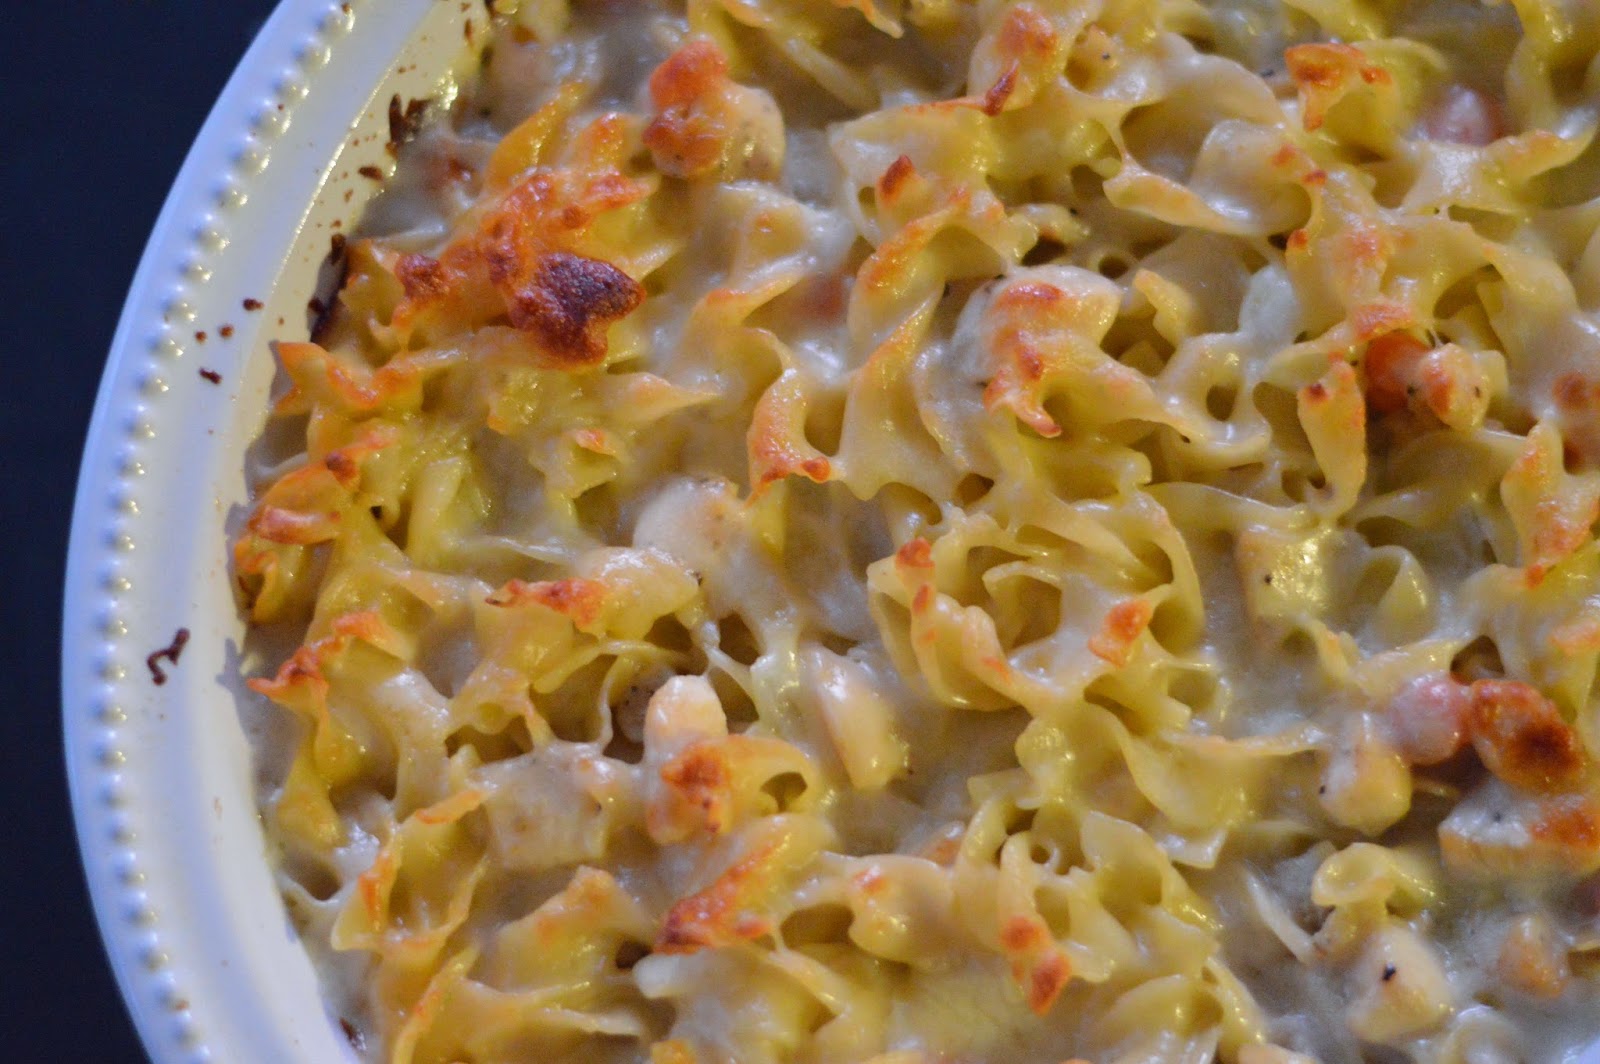 The Art of Comfort Baking: Chicken and Egg Noodle Casserole